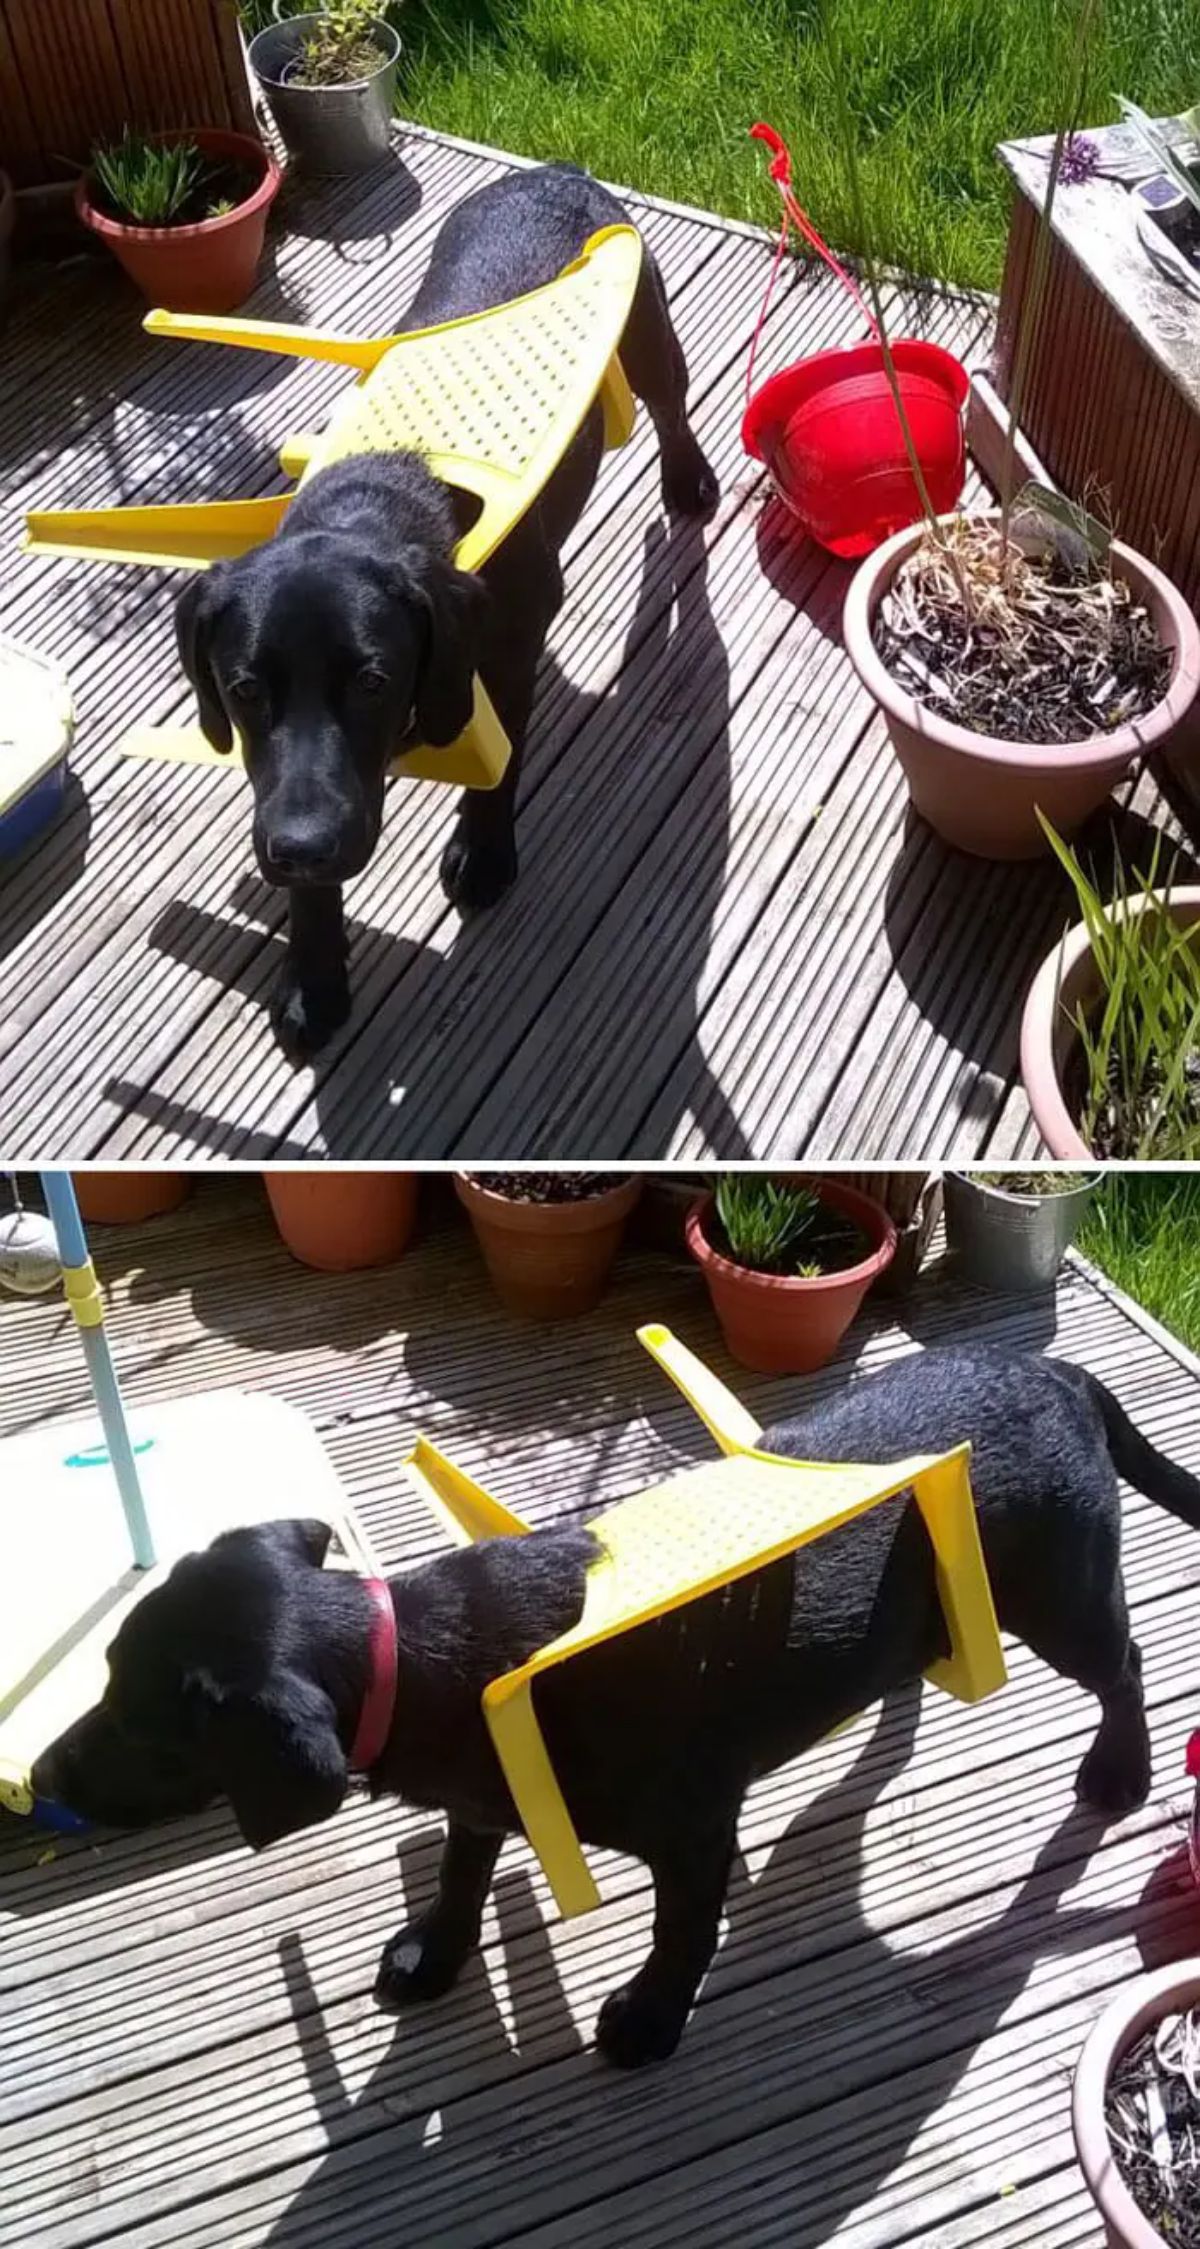 2 photos of a black labrador stuck with a yellow chair on its back